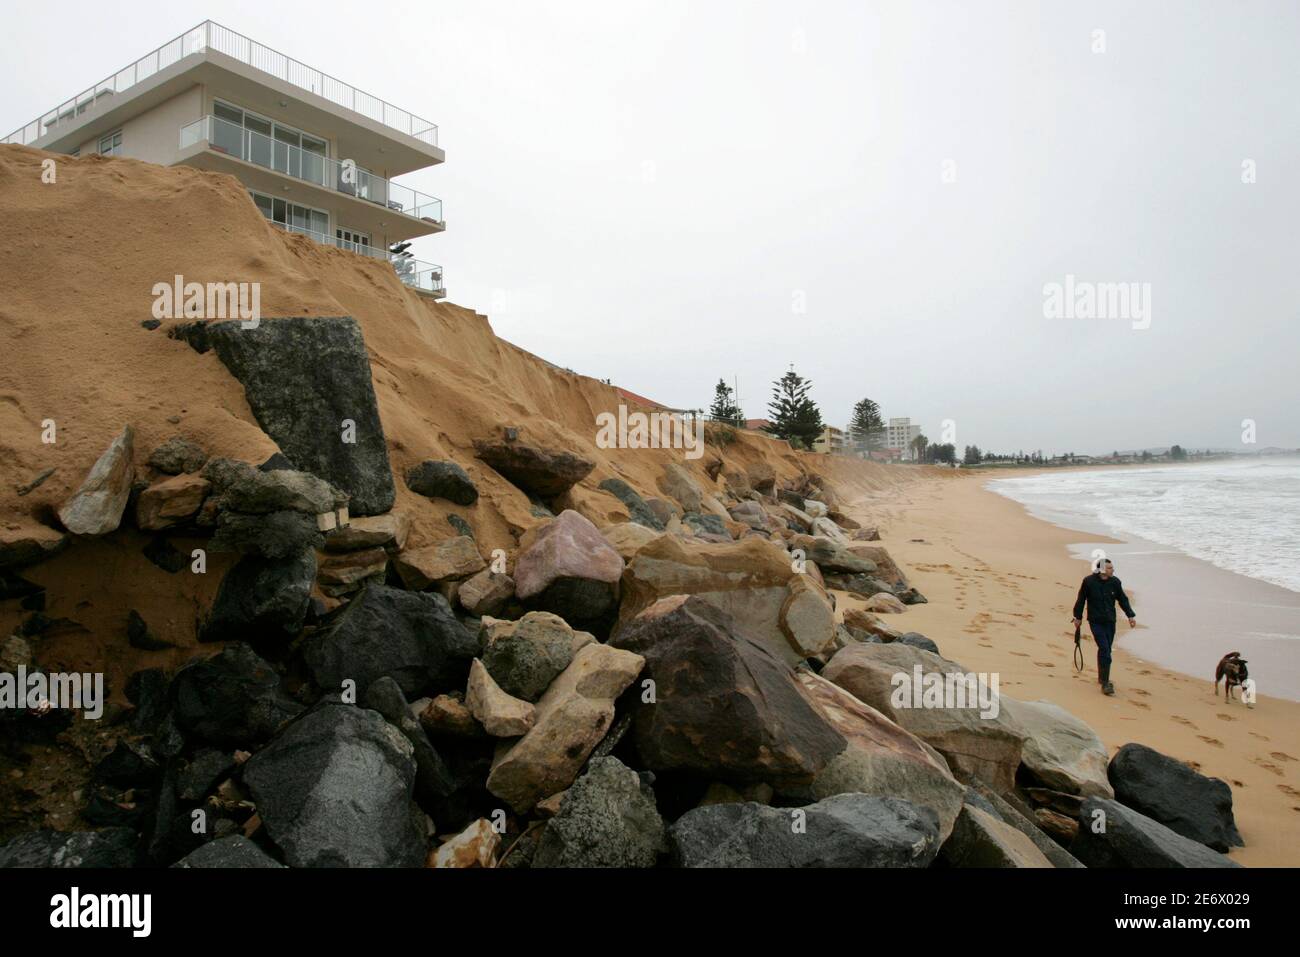 A man walks his dog past rocks exposed by high seas near an apartment block at South Narrabeen Beach in Sydney June 10, 2007. The death toll from a storm and torrential rain hitting Australia's east coast stands at seven with two still missing, said police as forecasters say conditions will begin to ease. REUTERS/Will Burgess    (AUSTRALIA) Stock Photo